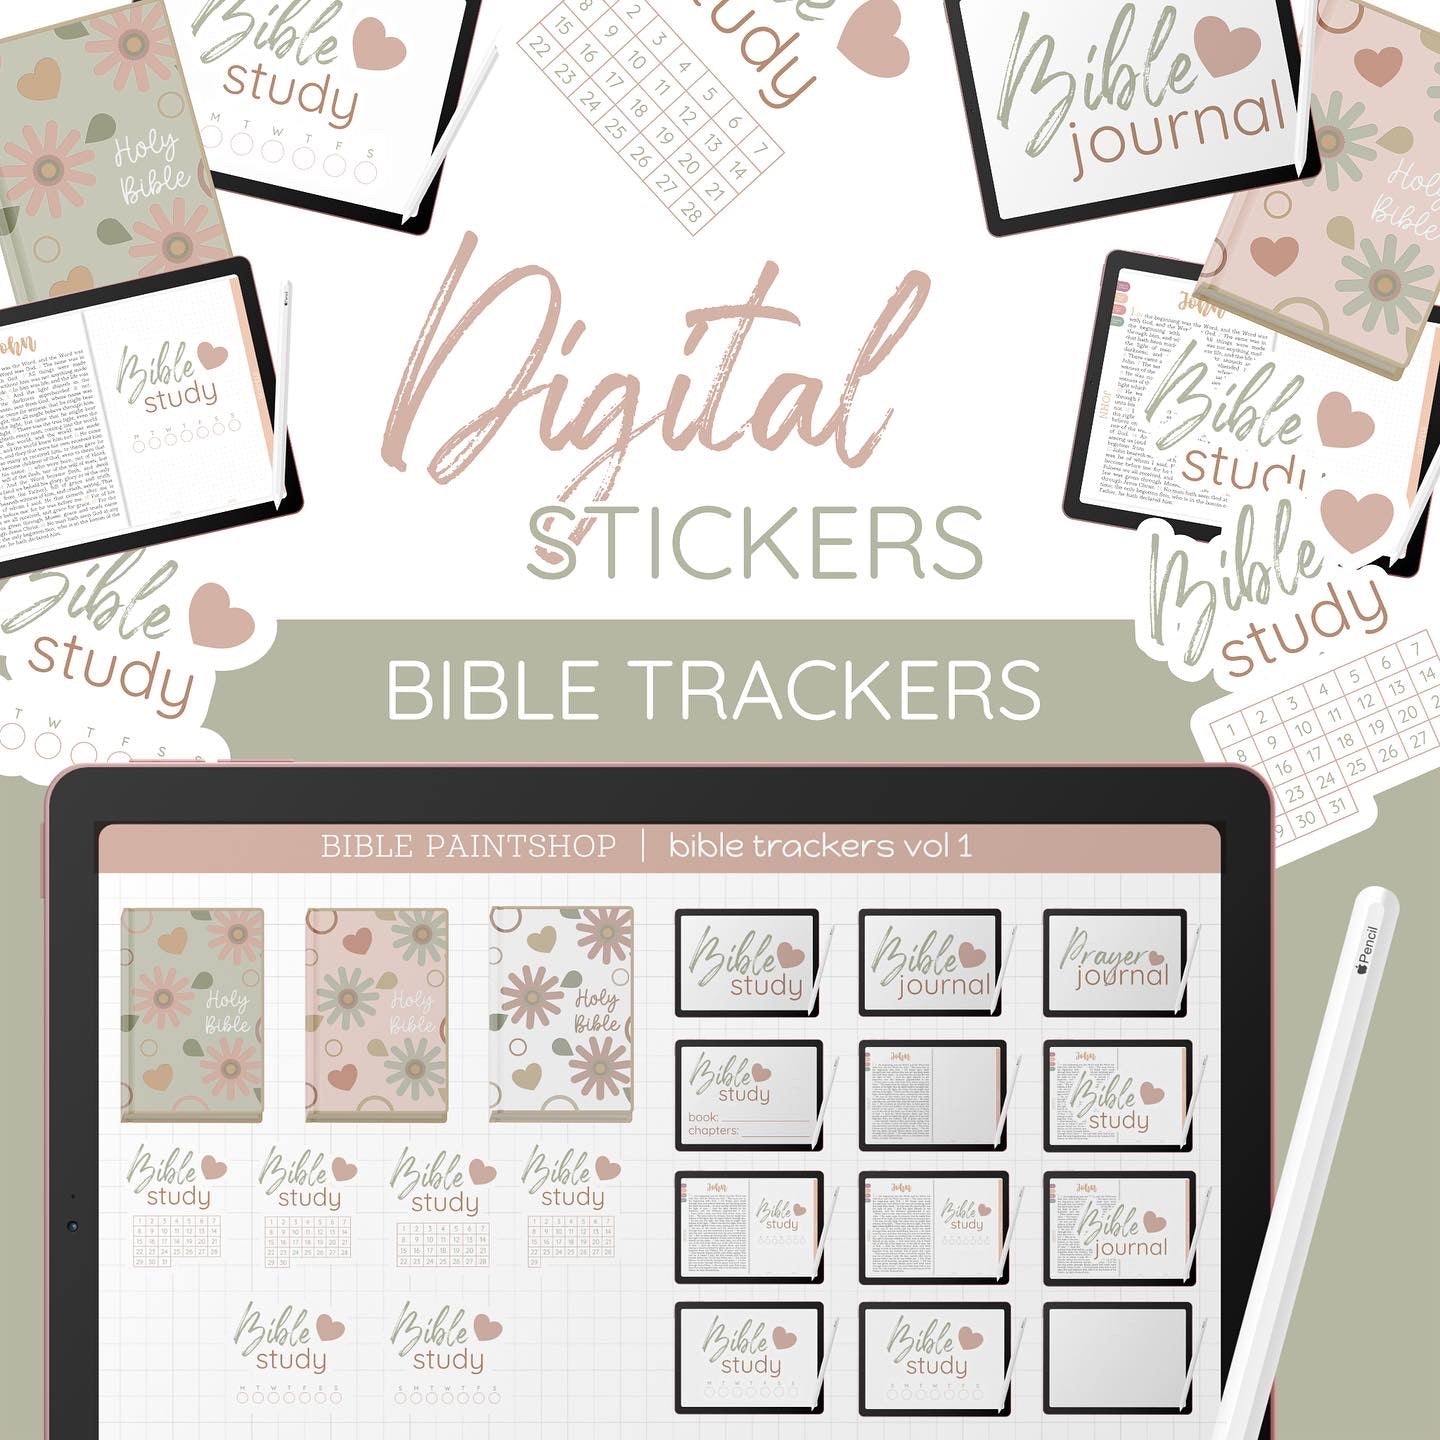 56 Tiny Bible Reading Planner Stickers, Tiny Church Planner Stickers, Bible  Study Stickers, Bujo Bible Planner Stickers. L-140.